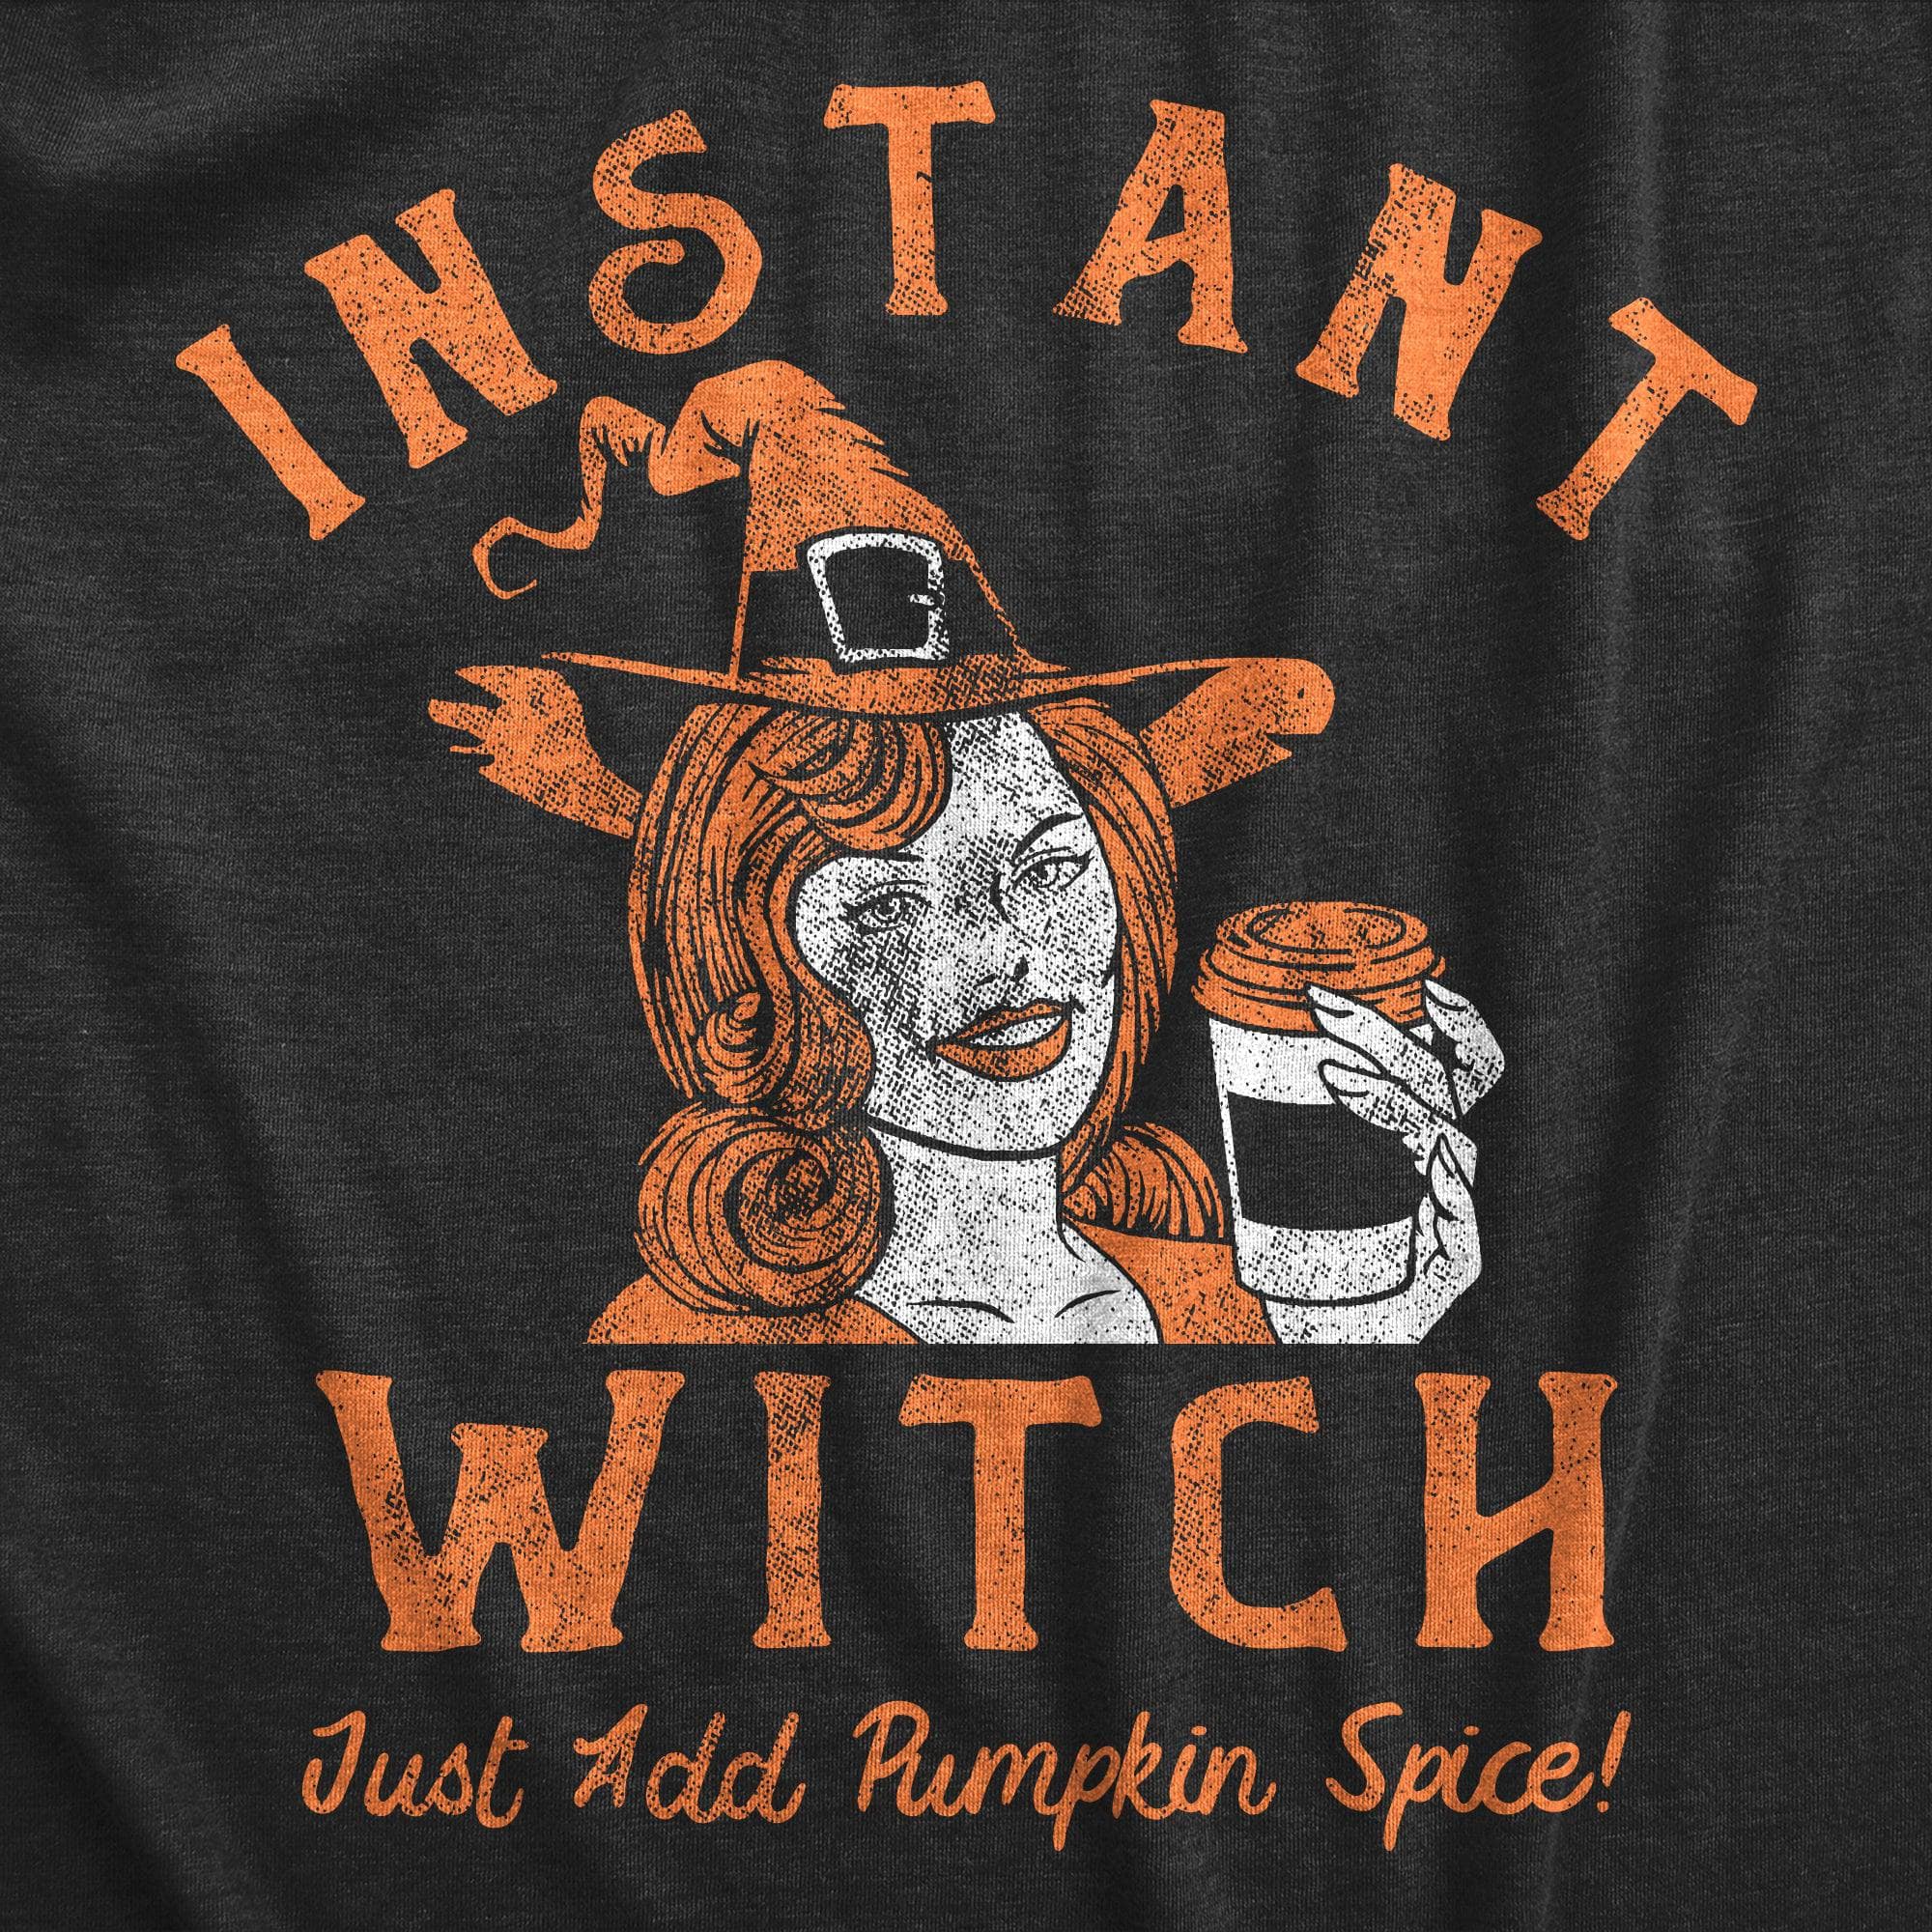 Instant Witch Women's Tshirt  -  Crazy Dog T-Shirts